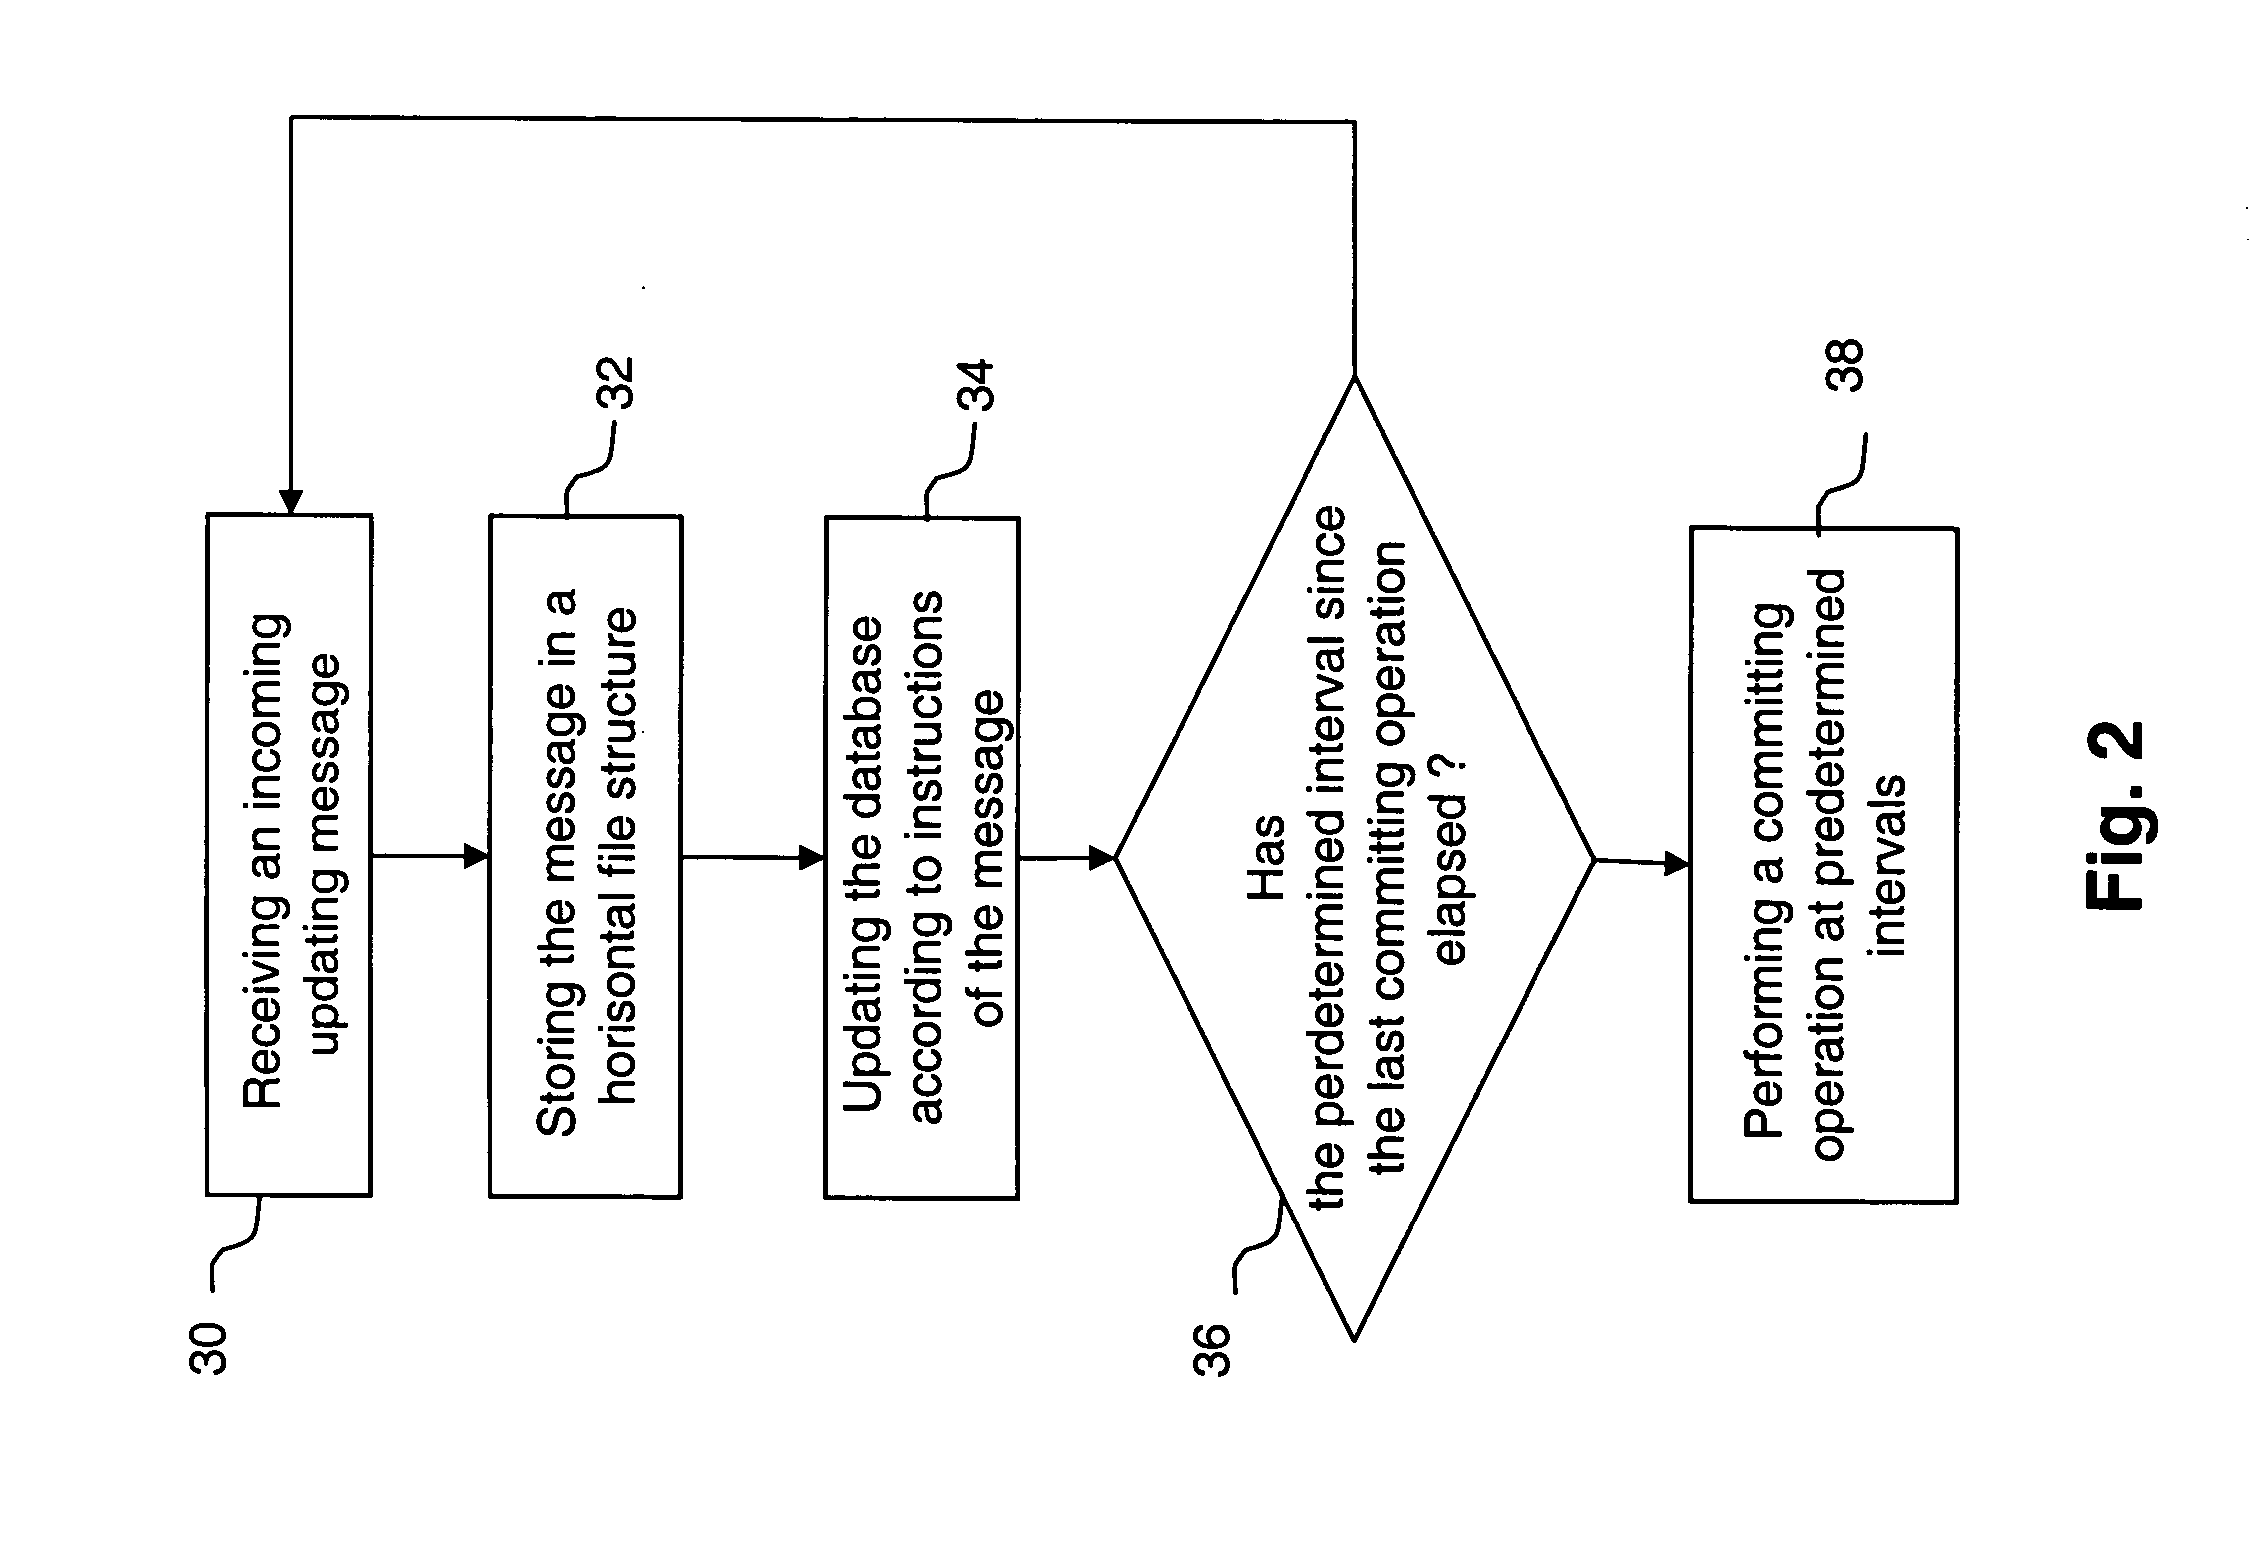 Method for enhancing the operation of a database